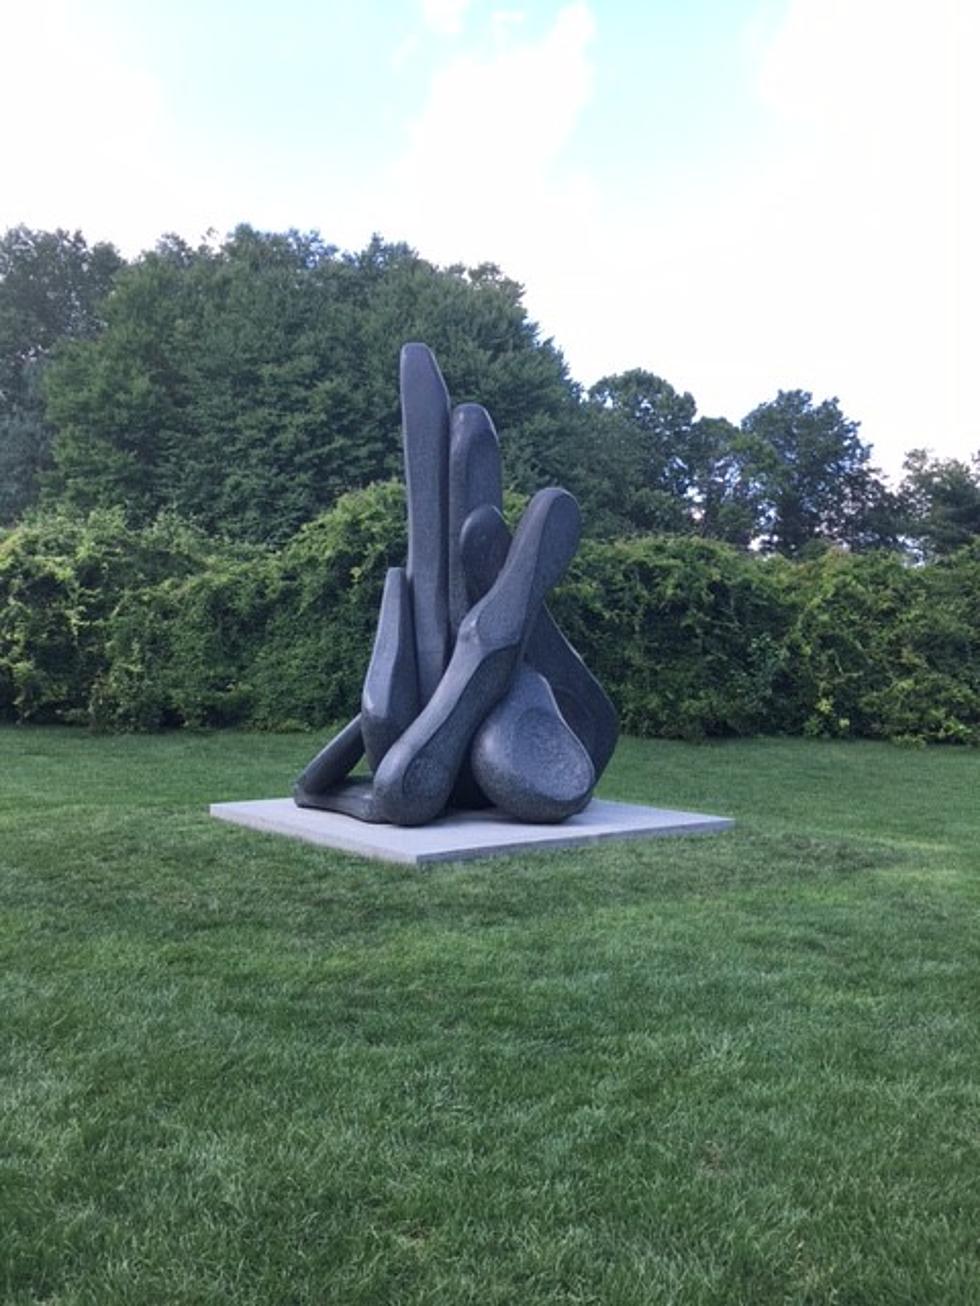 Ever Been To Jersey’s Grounds For Sculpture?